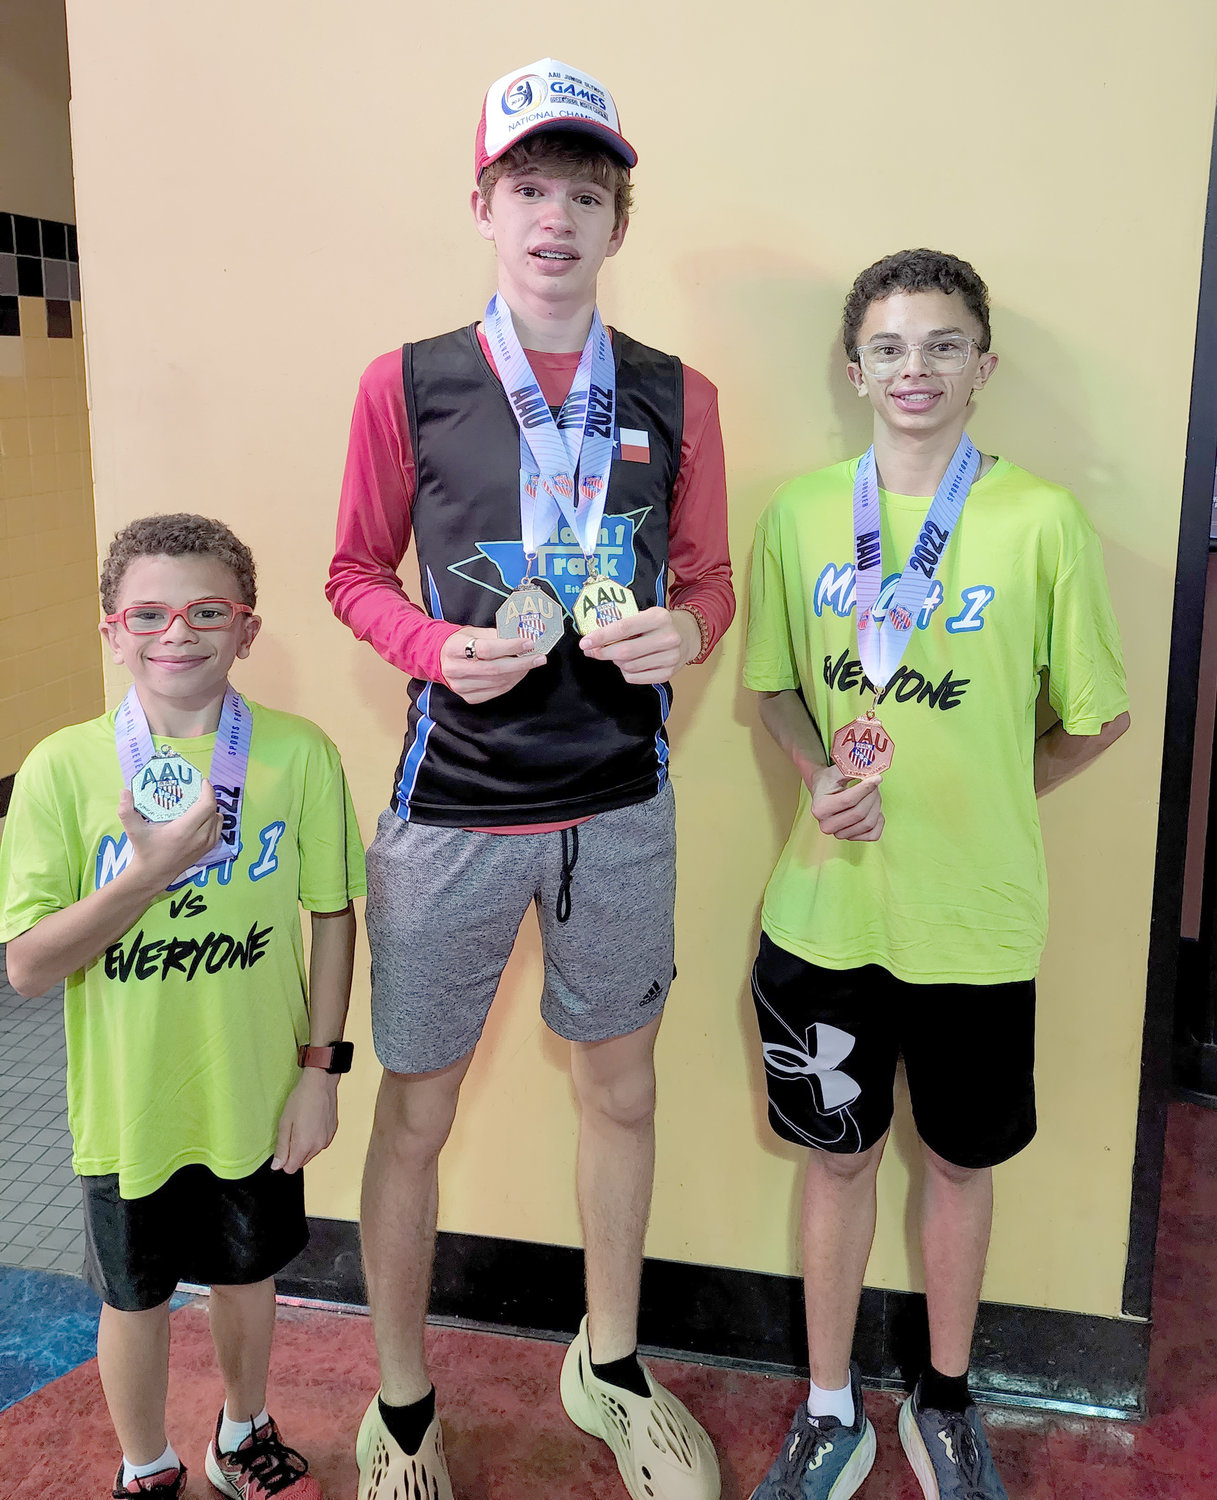 From left: Josh Fink of Aledo won a silver medal, Granbury's Gannon Dolan) set a national record, and Jack Fink of Aledo placed fifth in their respective divisions for Mach I Track Club in Weatherford at the recent AAU Junior Olympics in North Carolina.